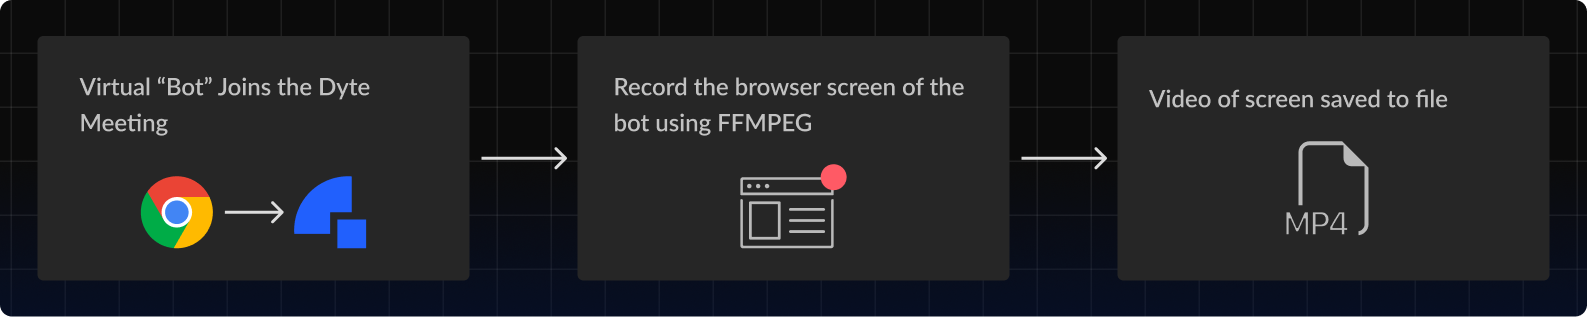 Recording the entire screen using tools like FFmpeg or OBS